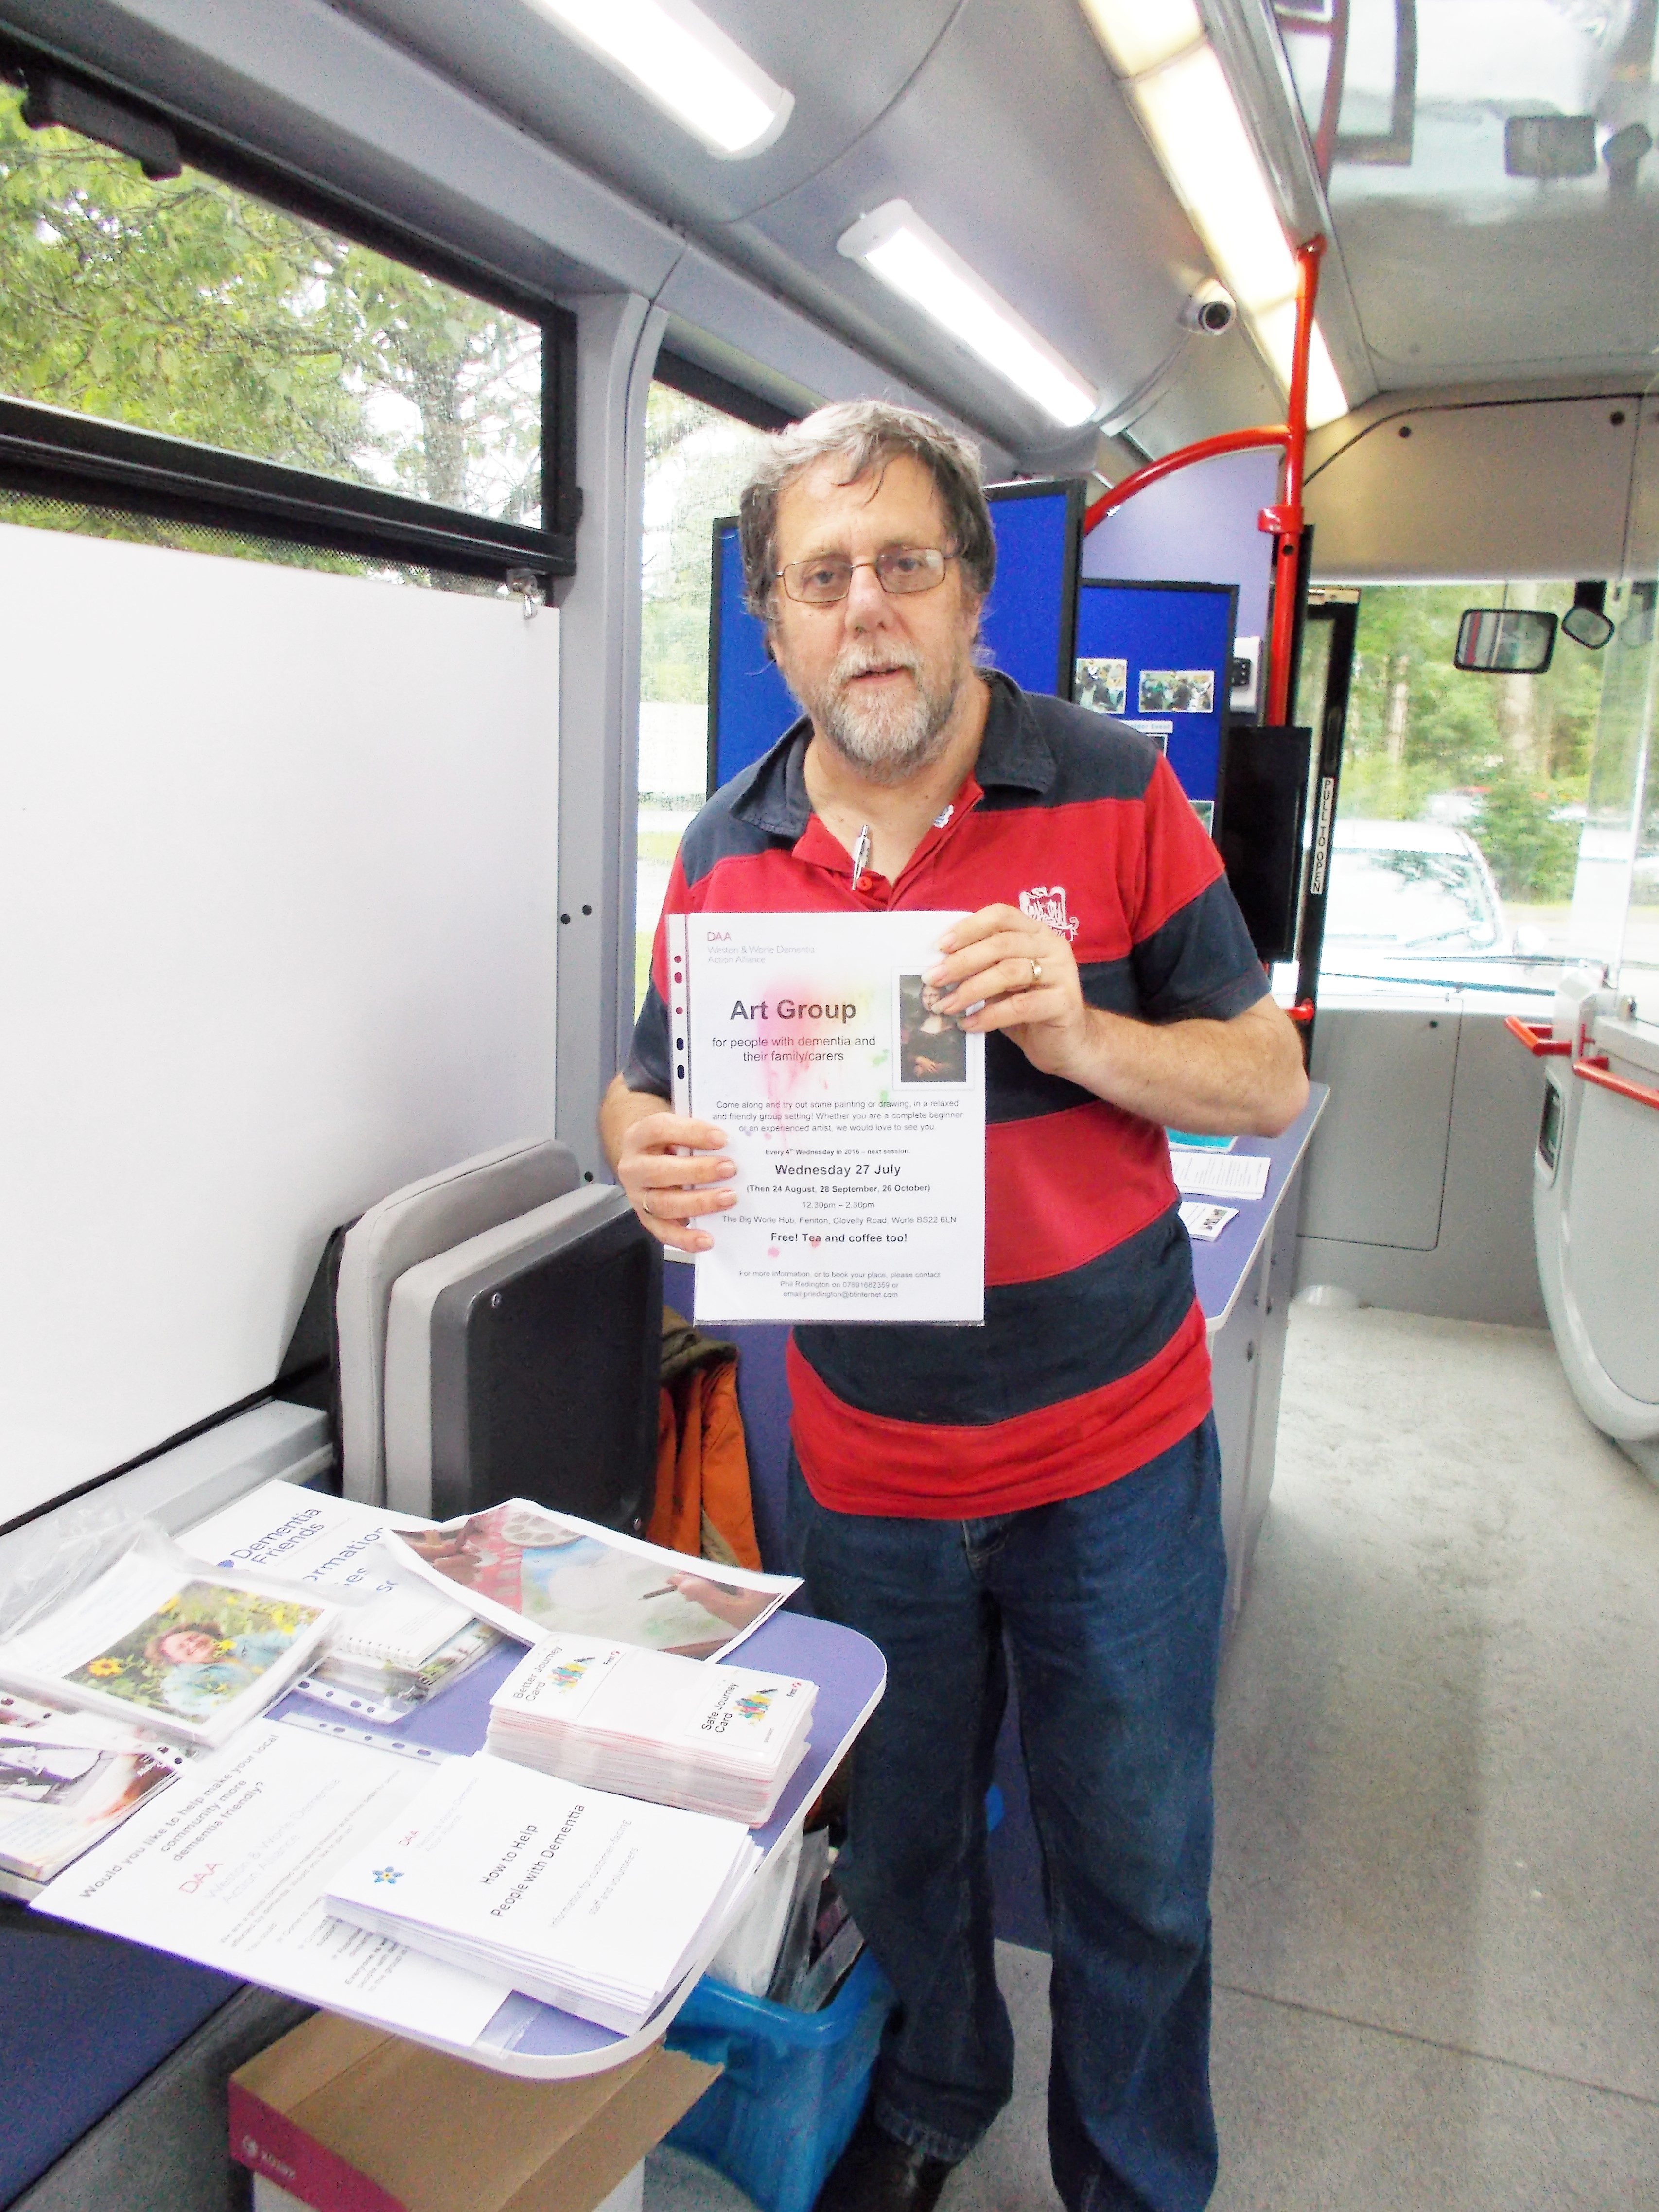 Volunteer holding a Healthwatch sign on board the bus